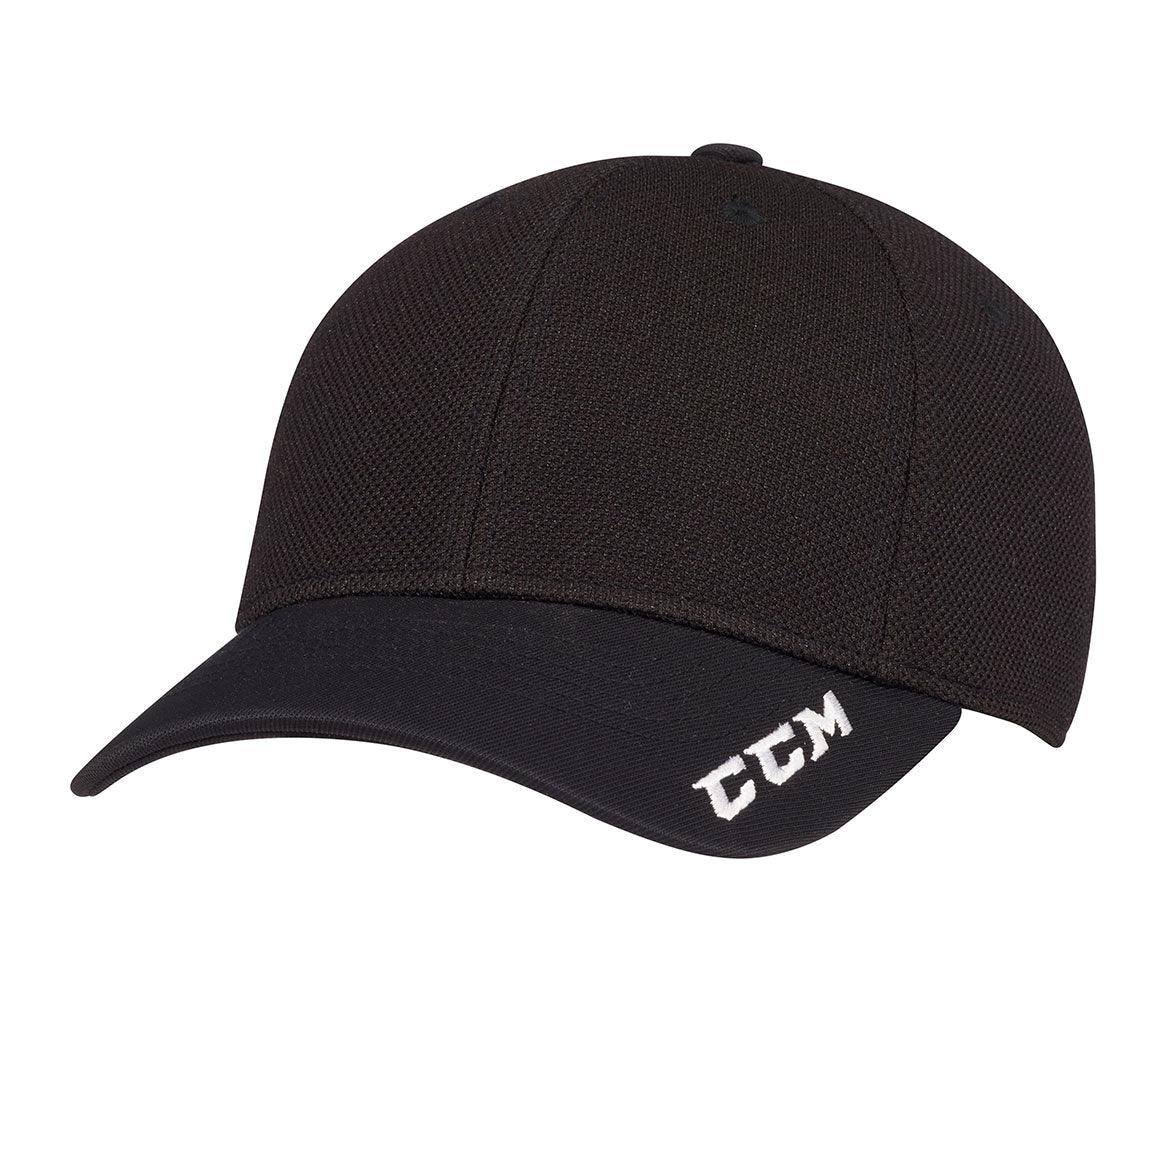 Team Training Perforated Snapback Cap - Junior - Sports Excellence